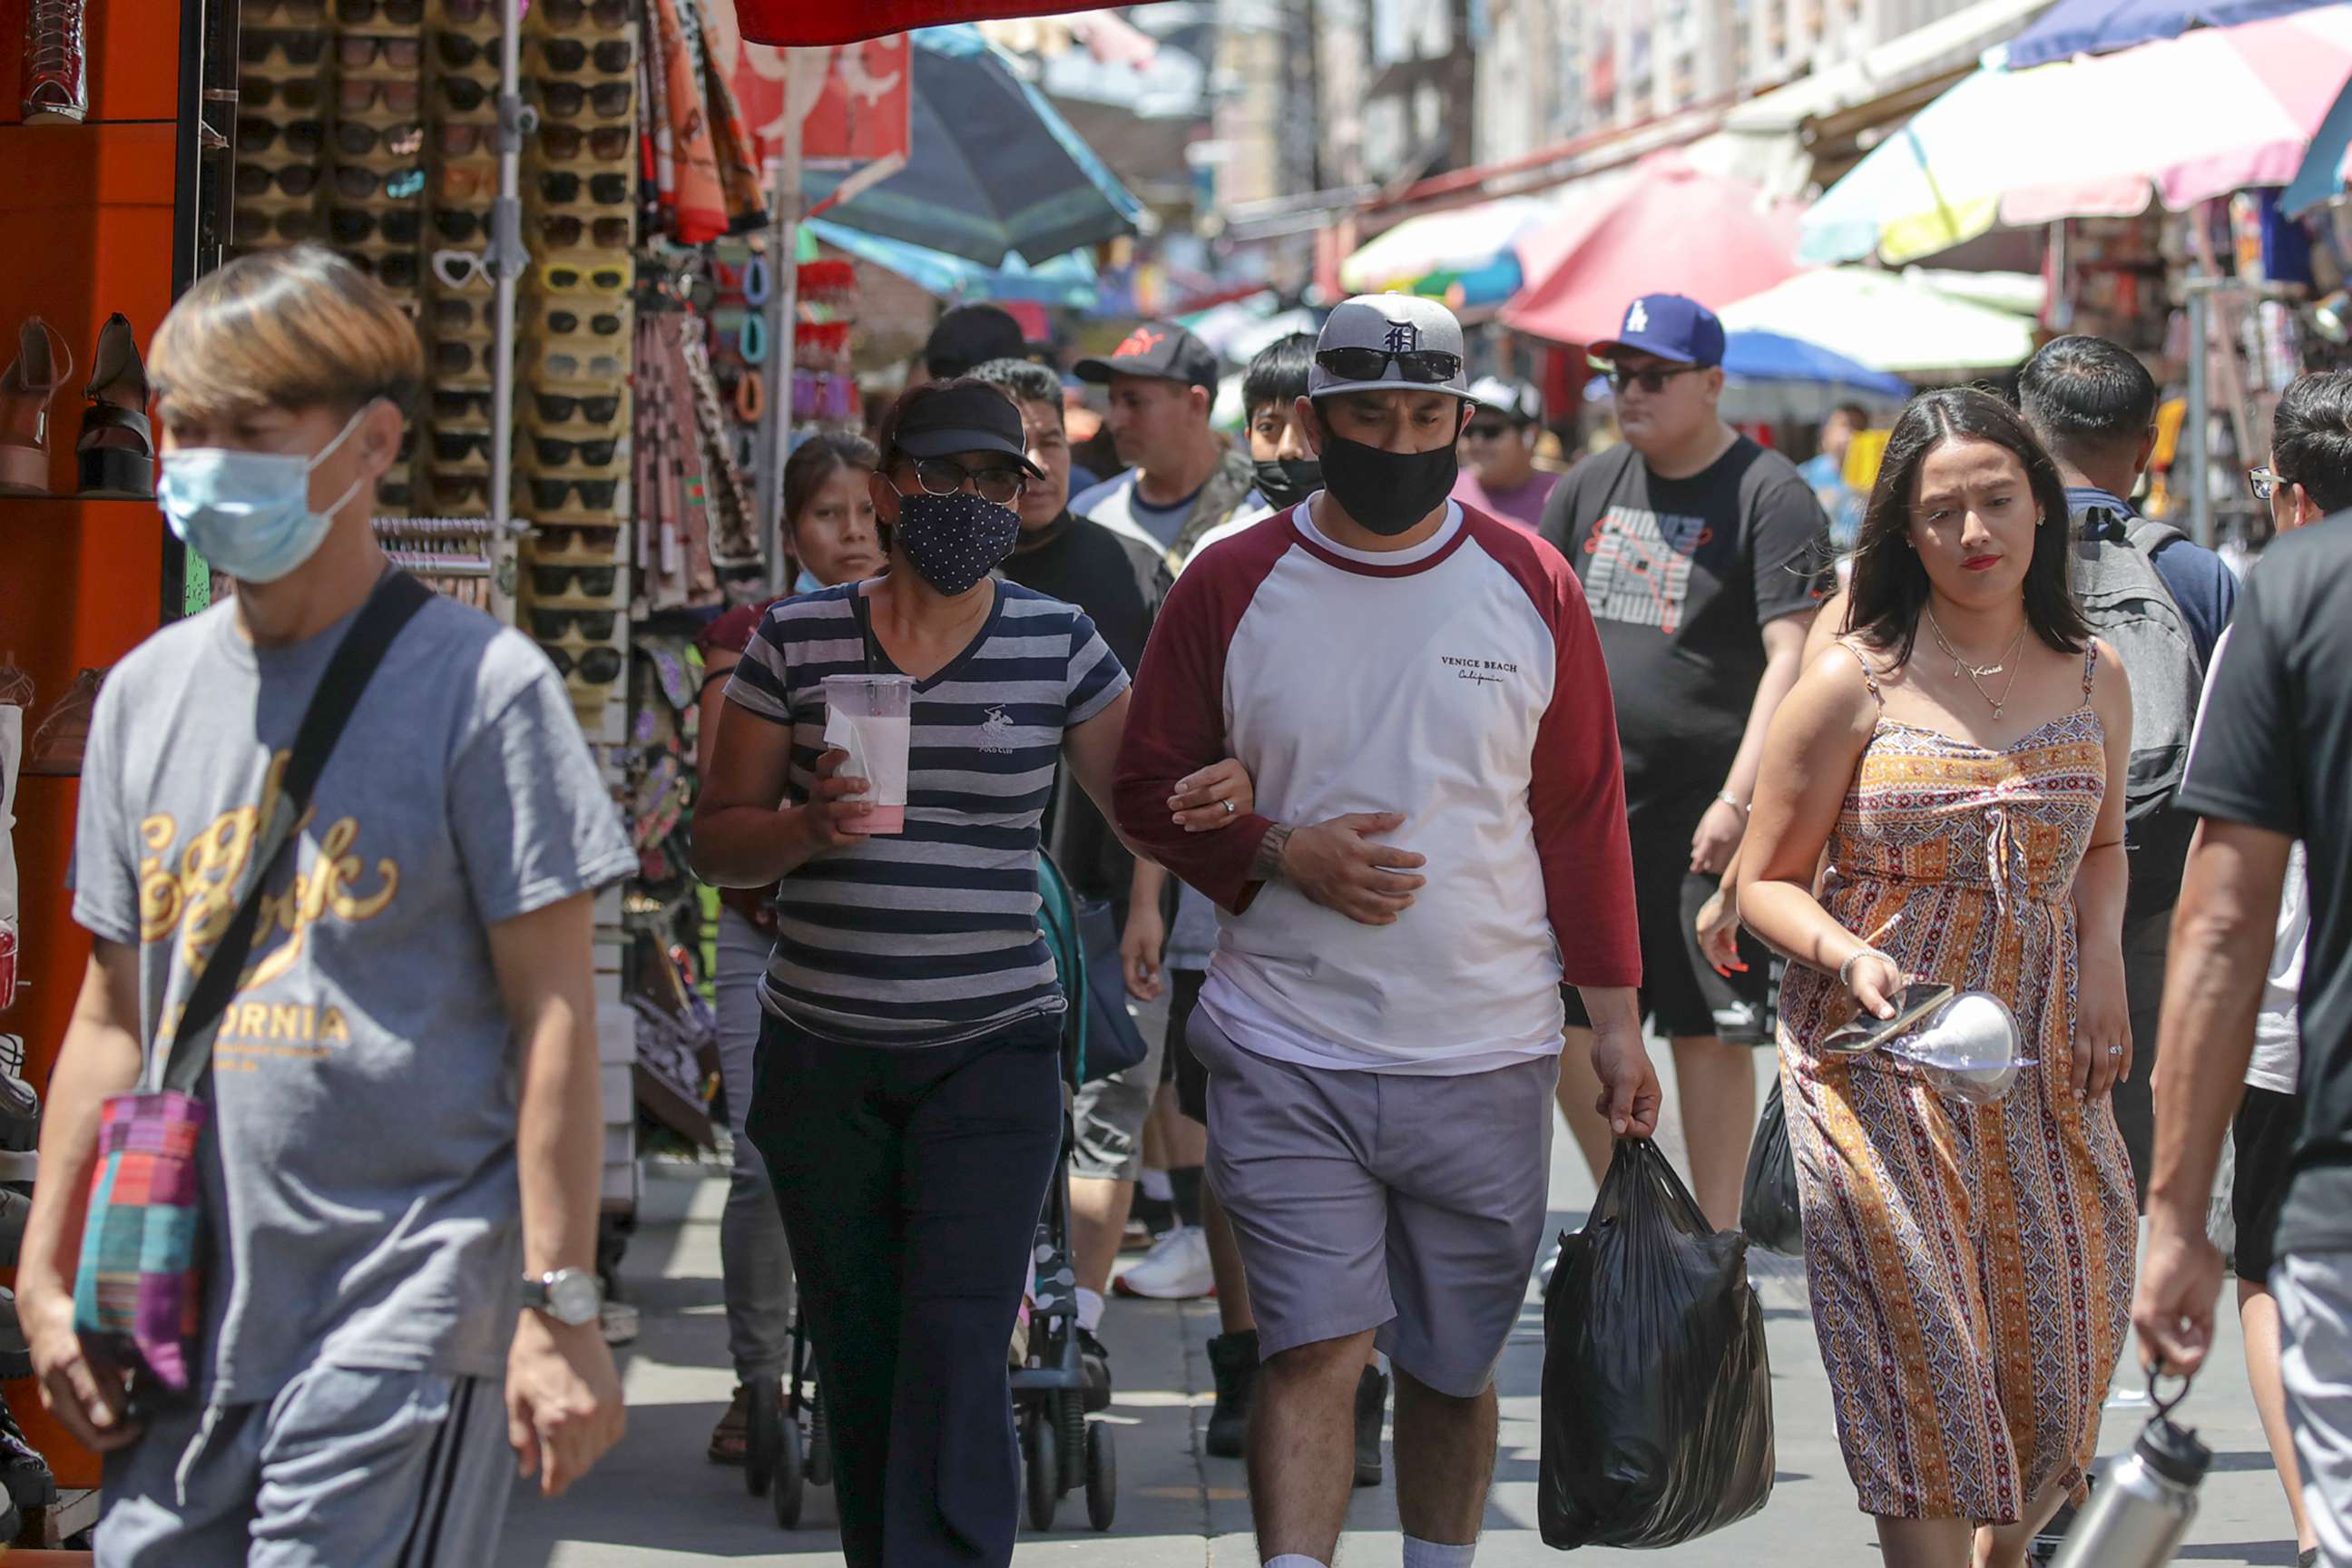 PHOTO: In this July 14, 2022 file photo shoppers, some wearing masks, visit in a market, in Los Angeles, during the COVID-19 pandemic.